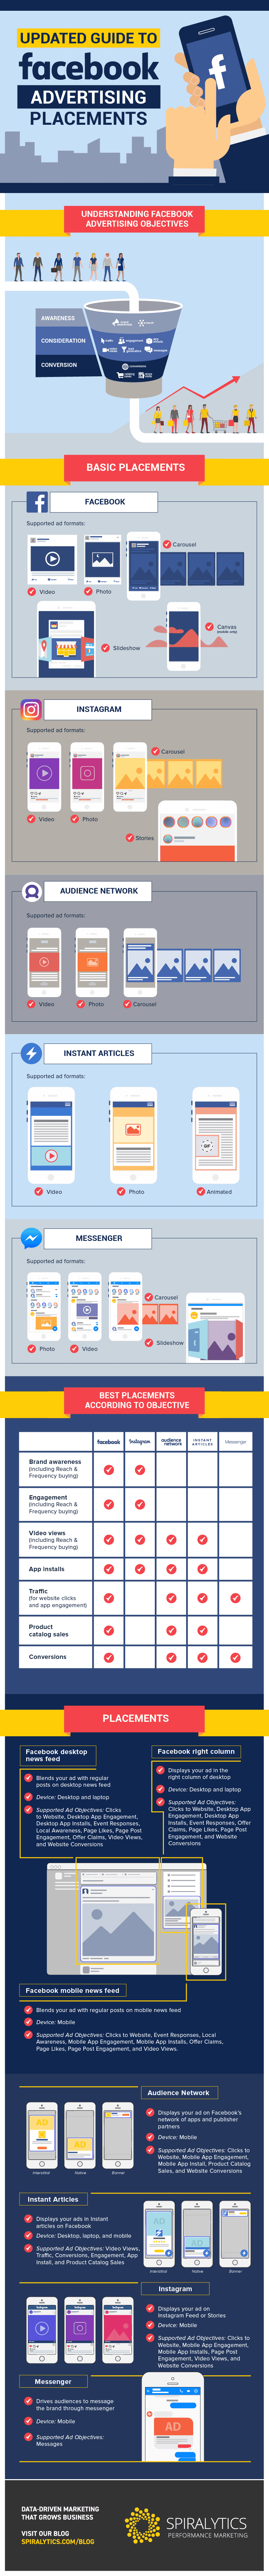 Ultimate Guide to Facebook Advertising Placements-rev1-02